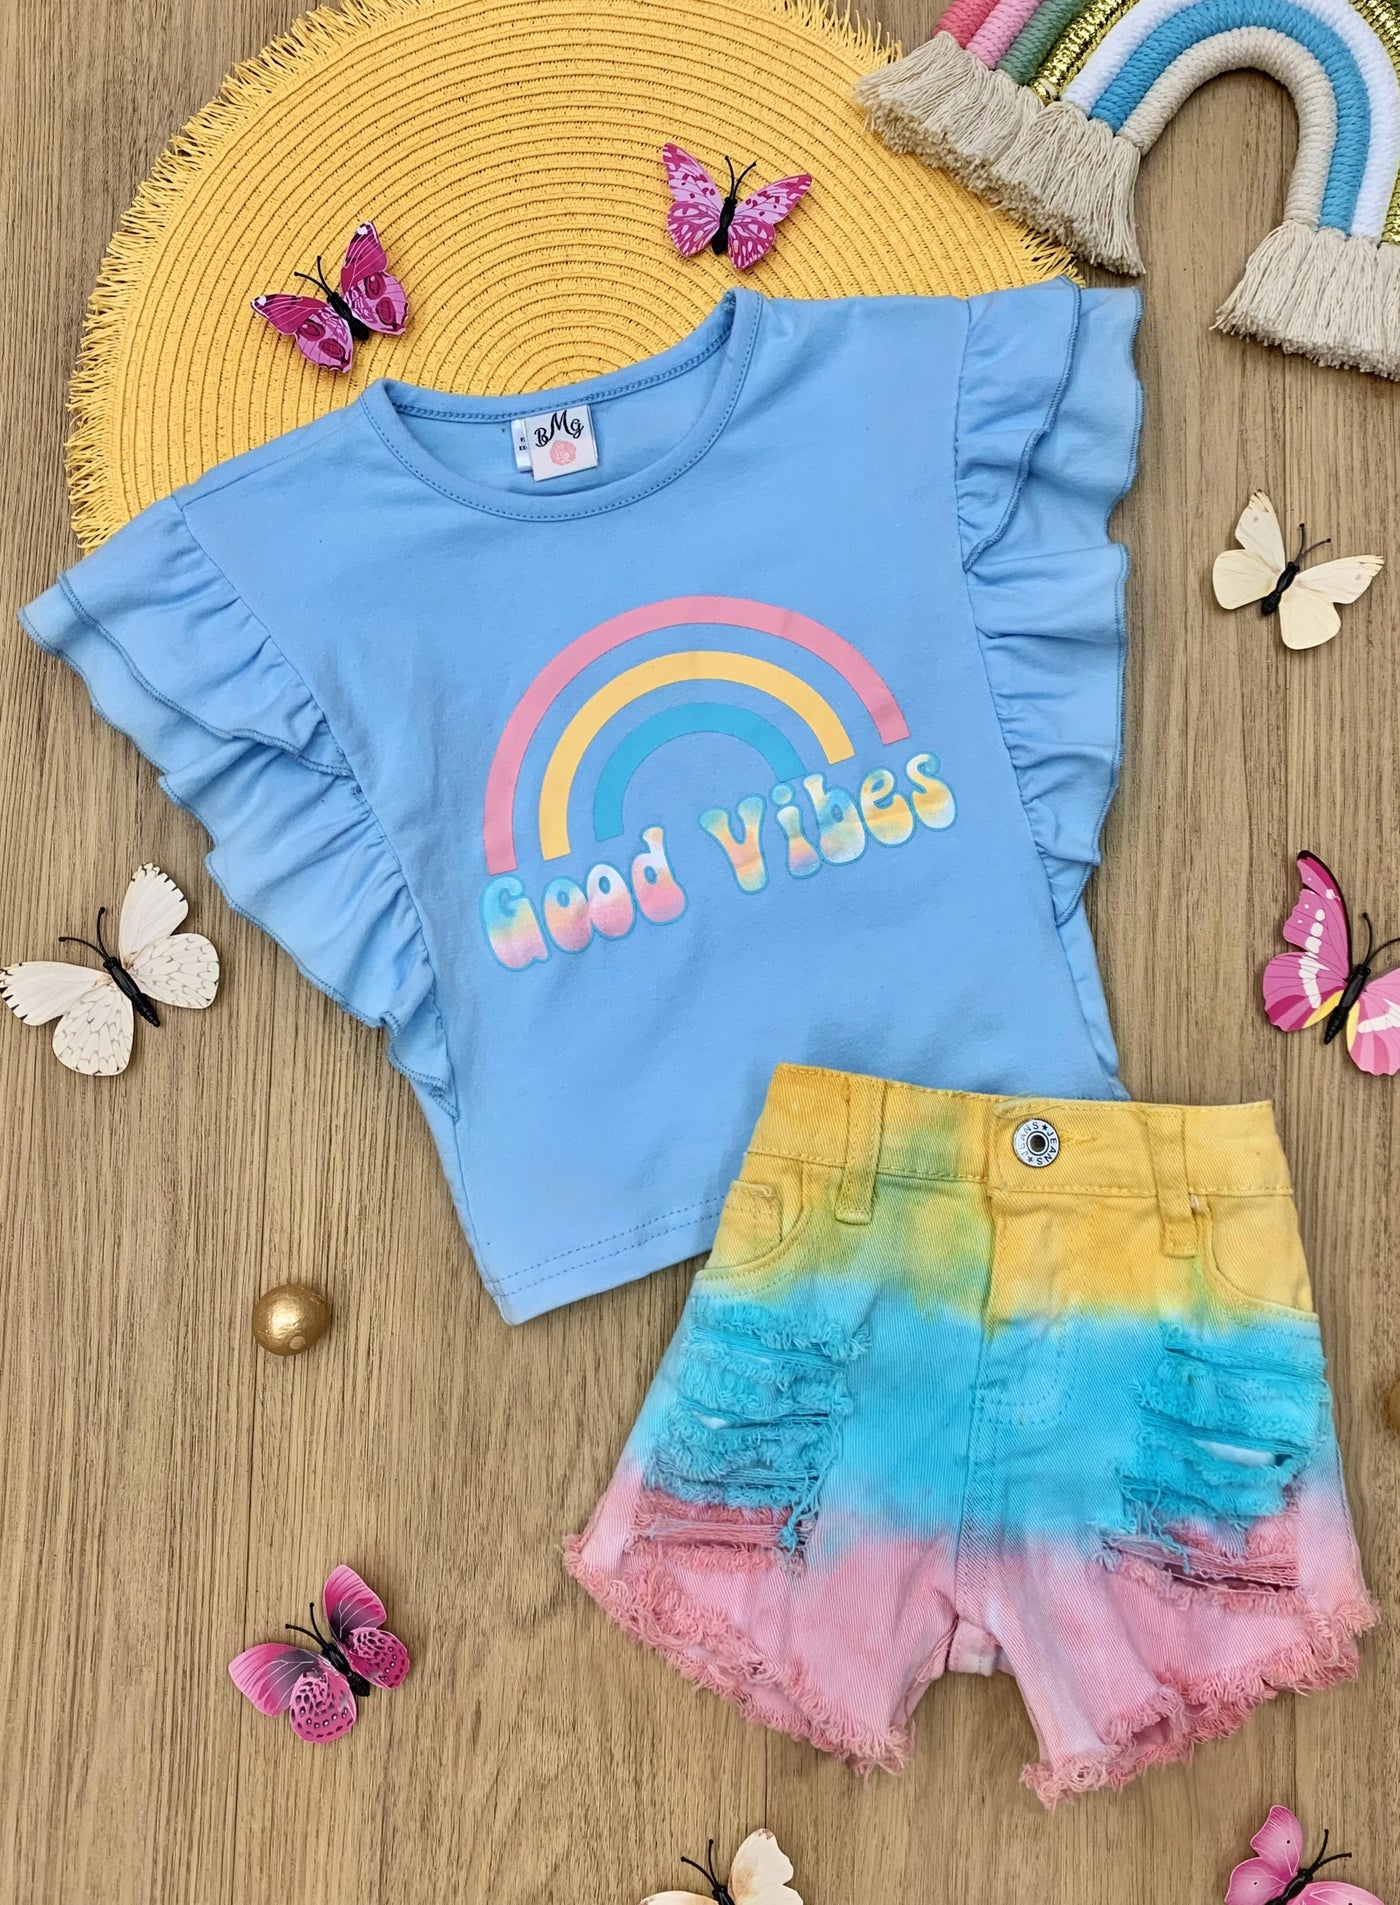 Girls set features a light blue ruffled top with "Good Vibes" graphics and tie-dye denim short